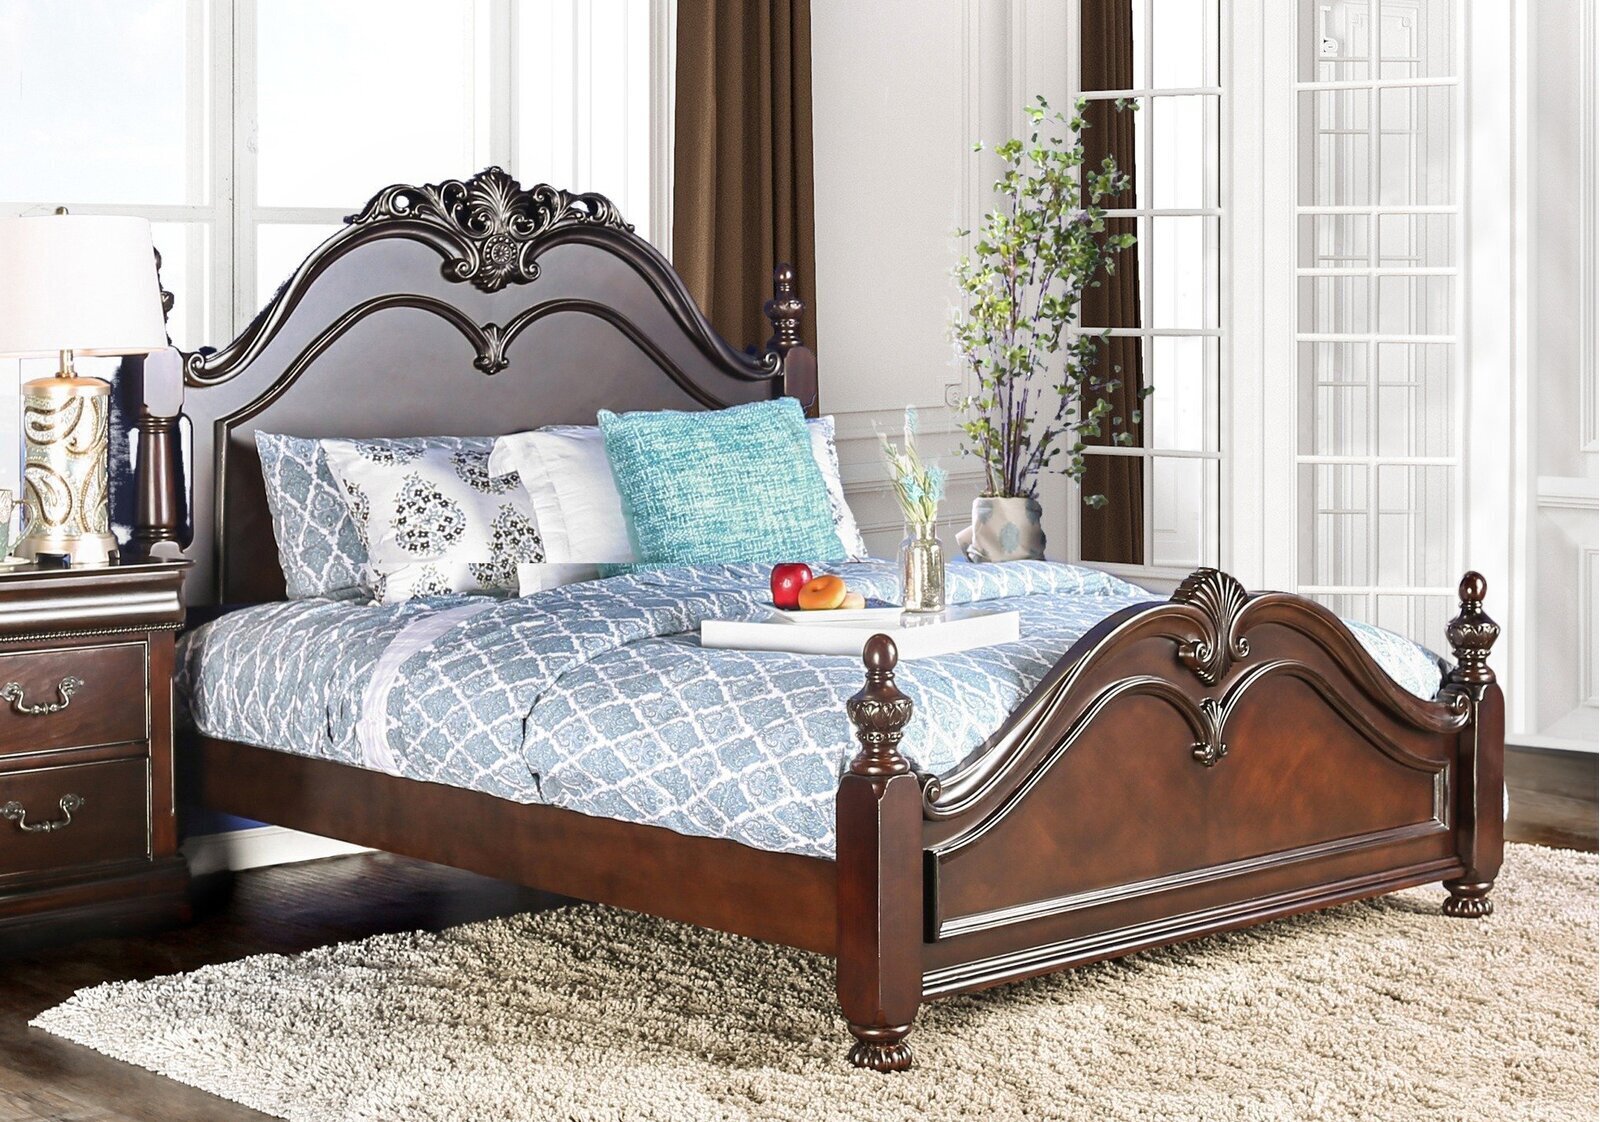 Cherry oak four poster bed